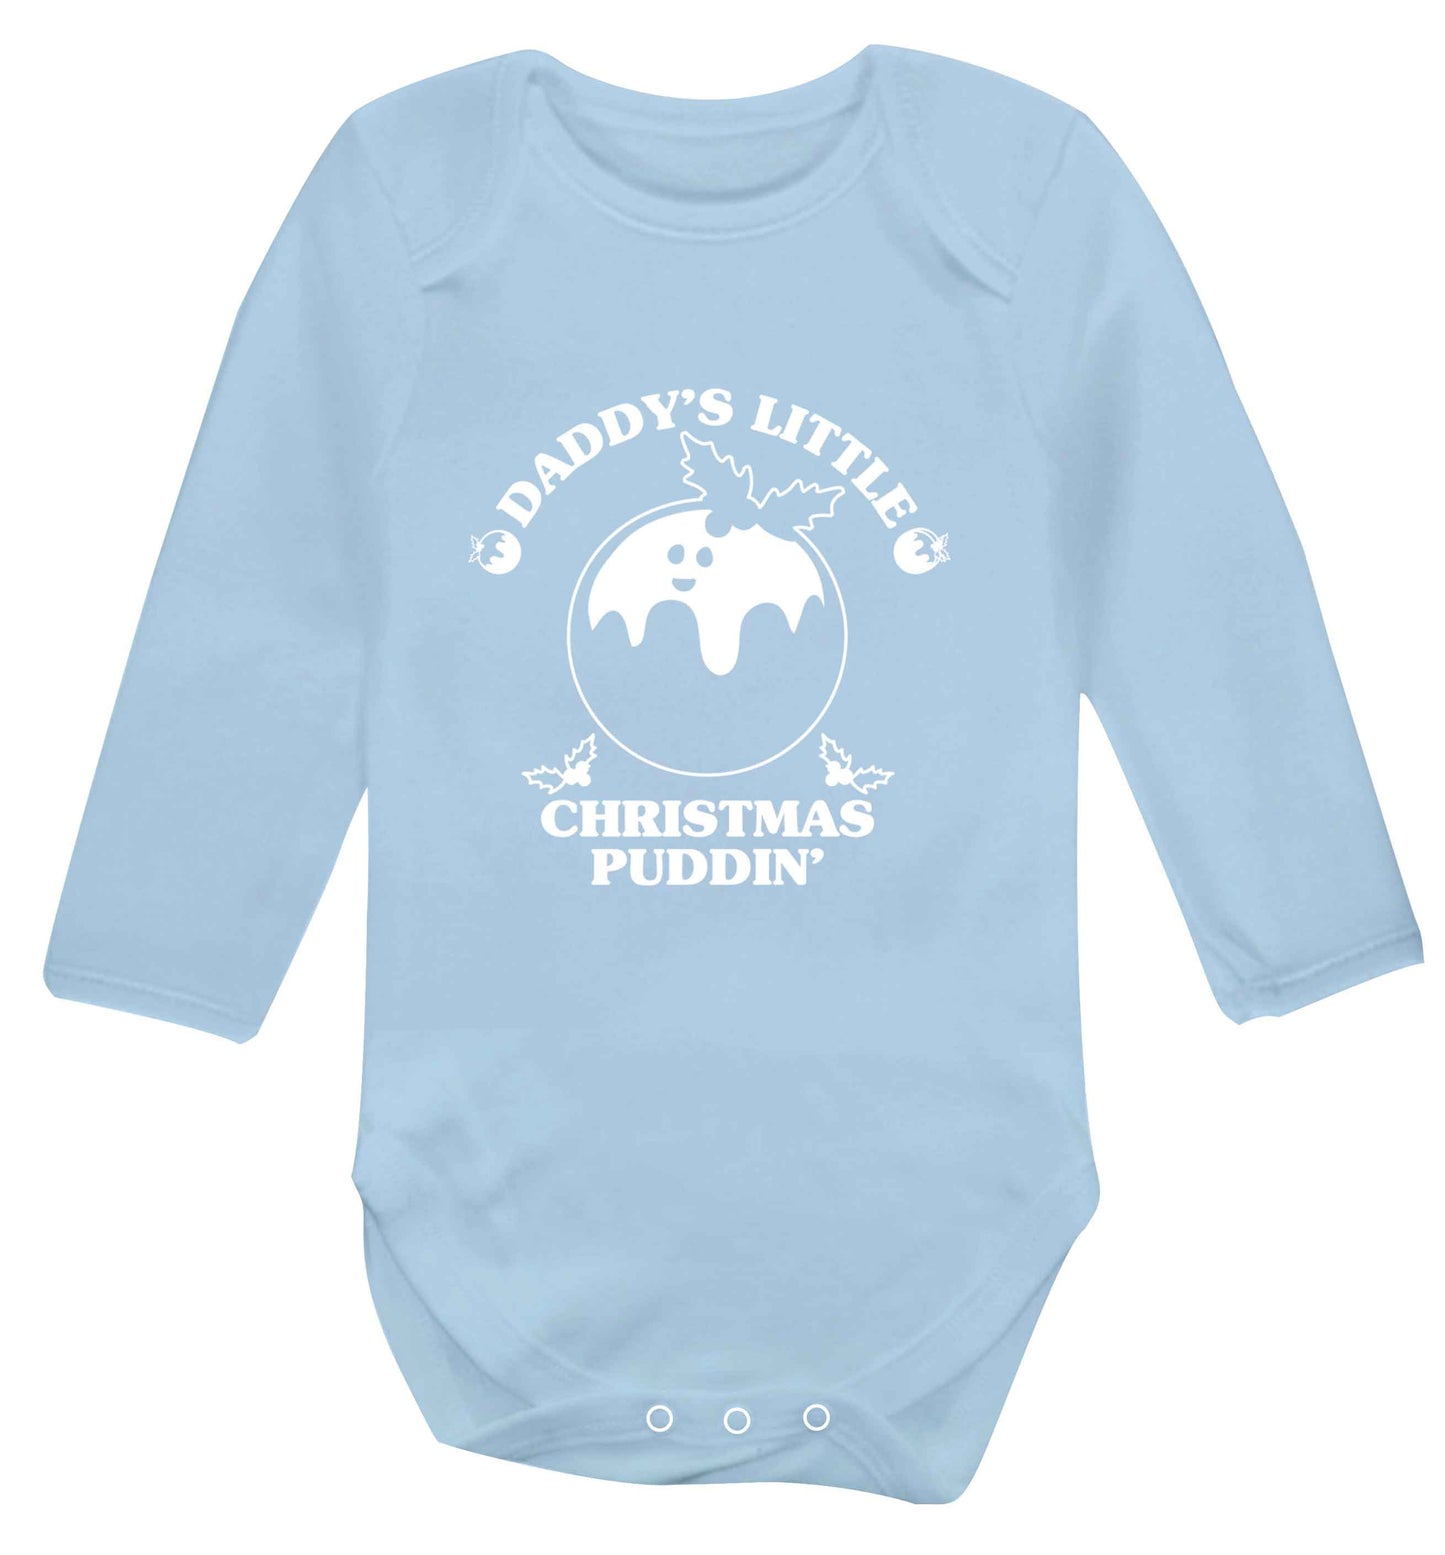 Daddy's little Christmas puddin' Baby Vest long sleeved pale blue 6-12 months